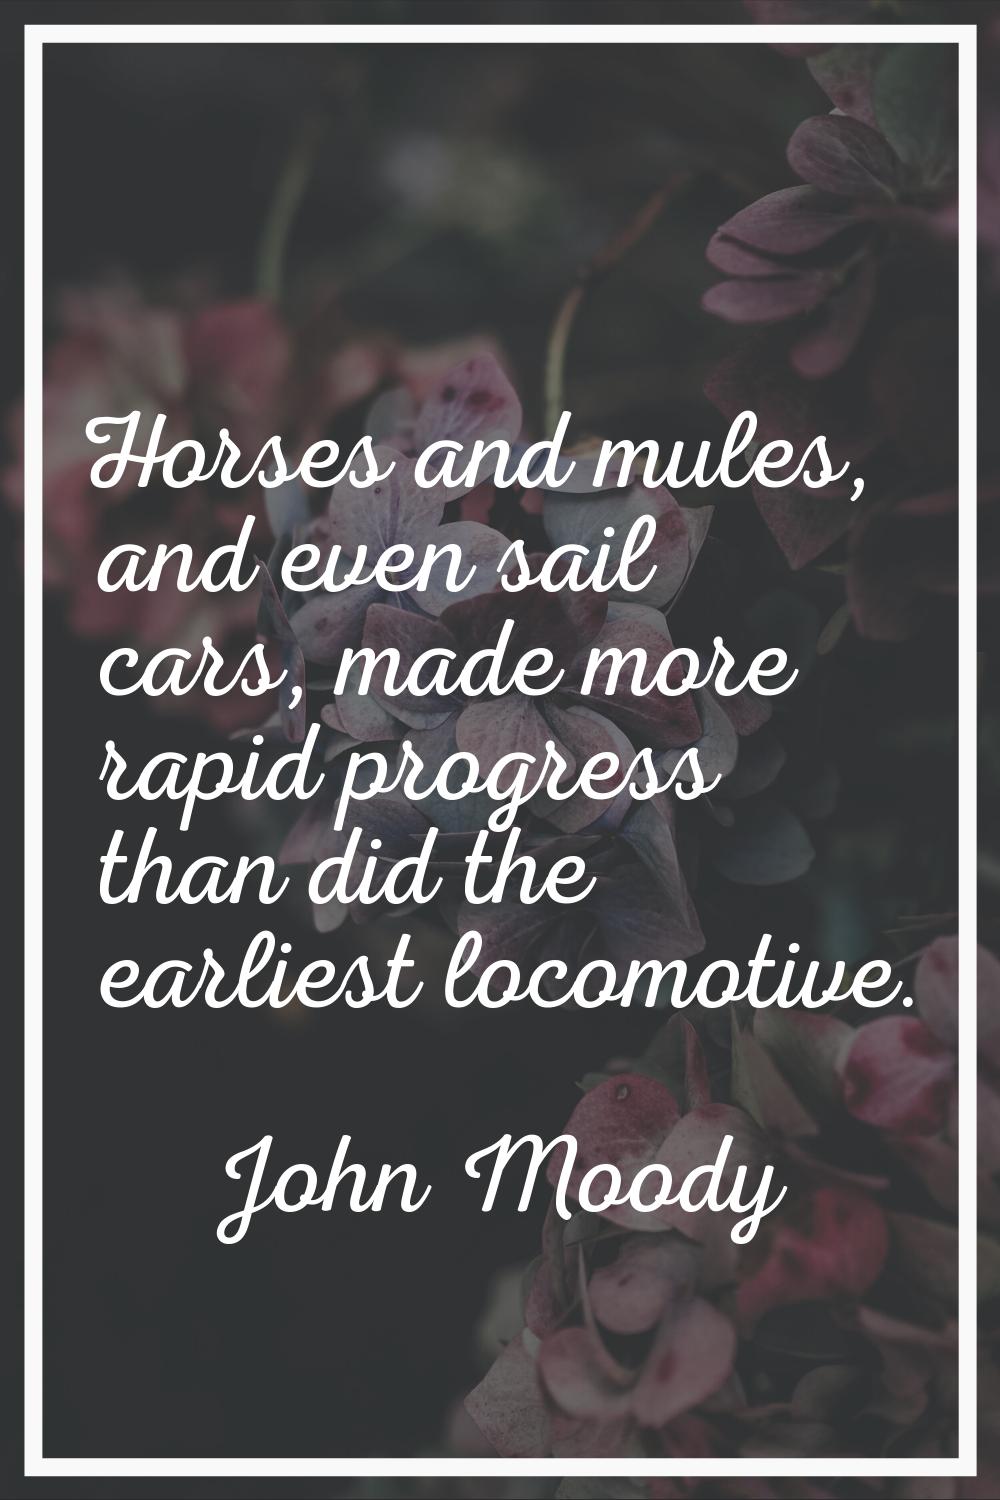 Horses and mules, and even sail cars, made more rapid progress than did the earliest locomotive.